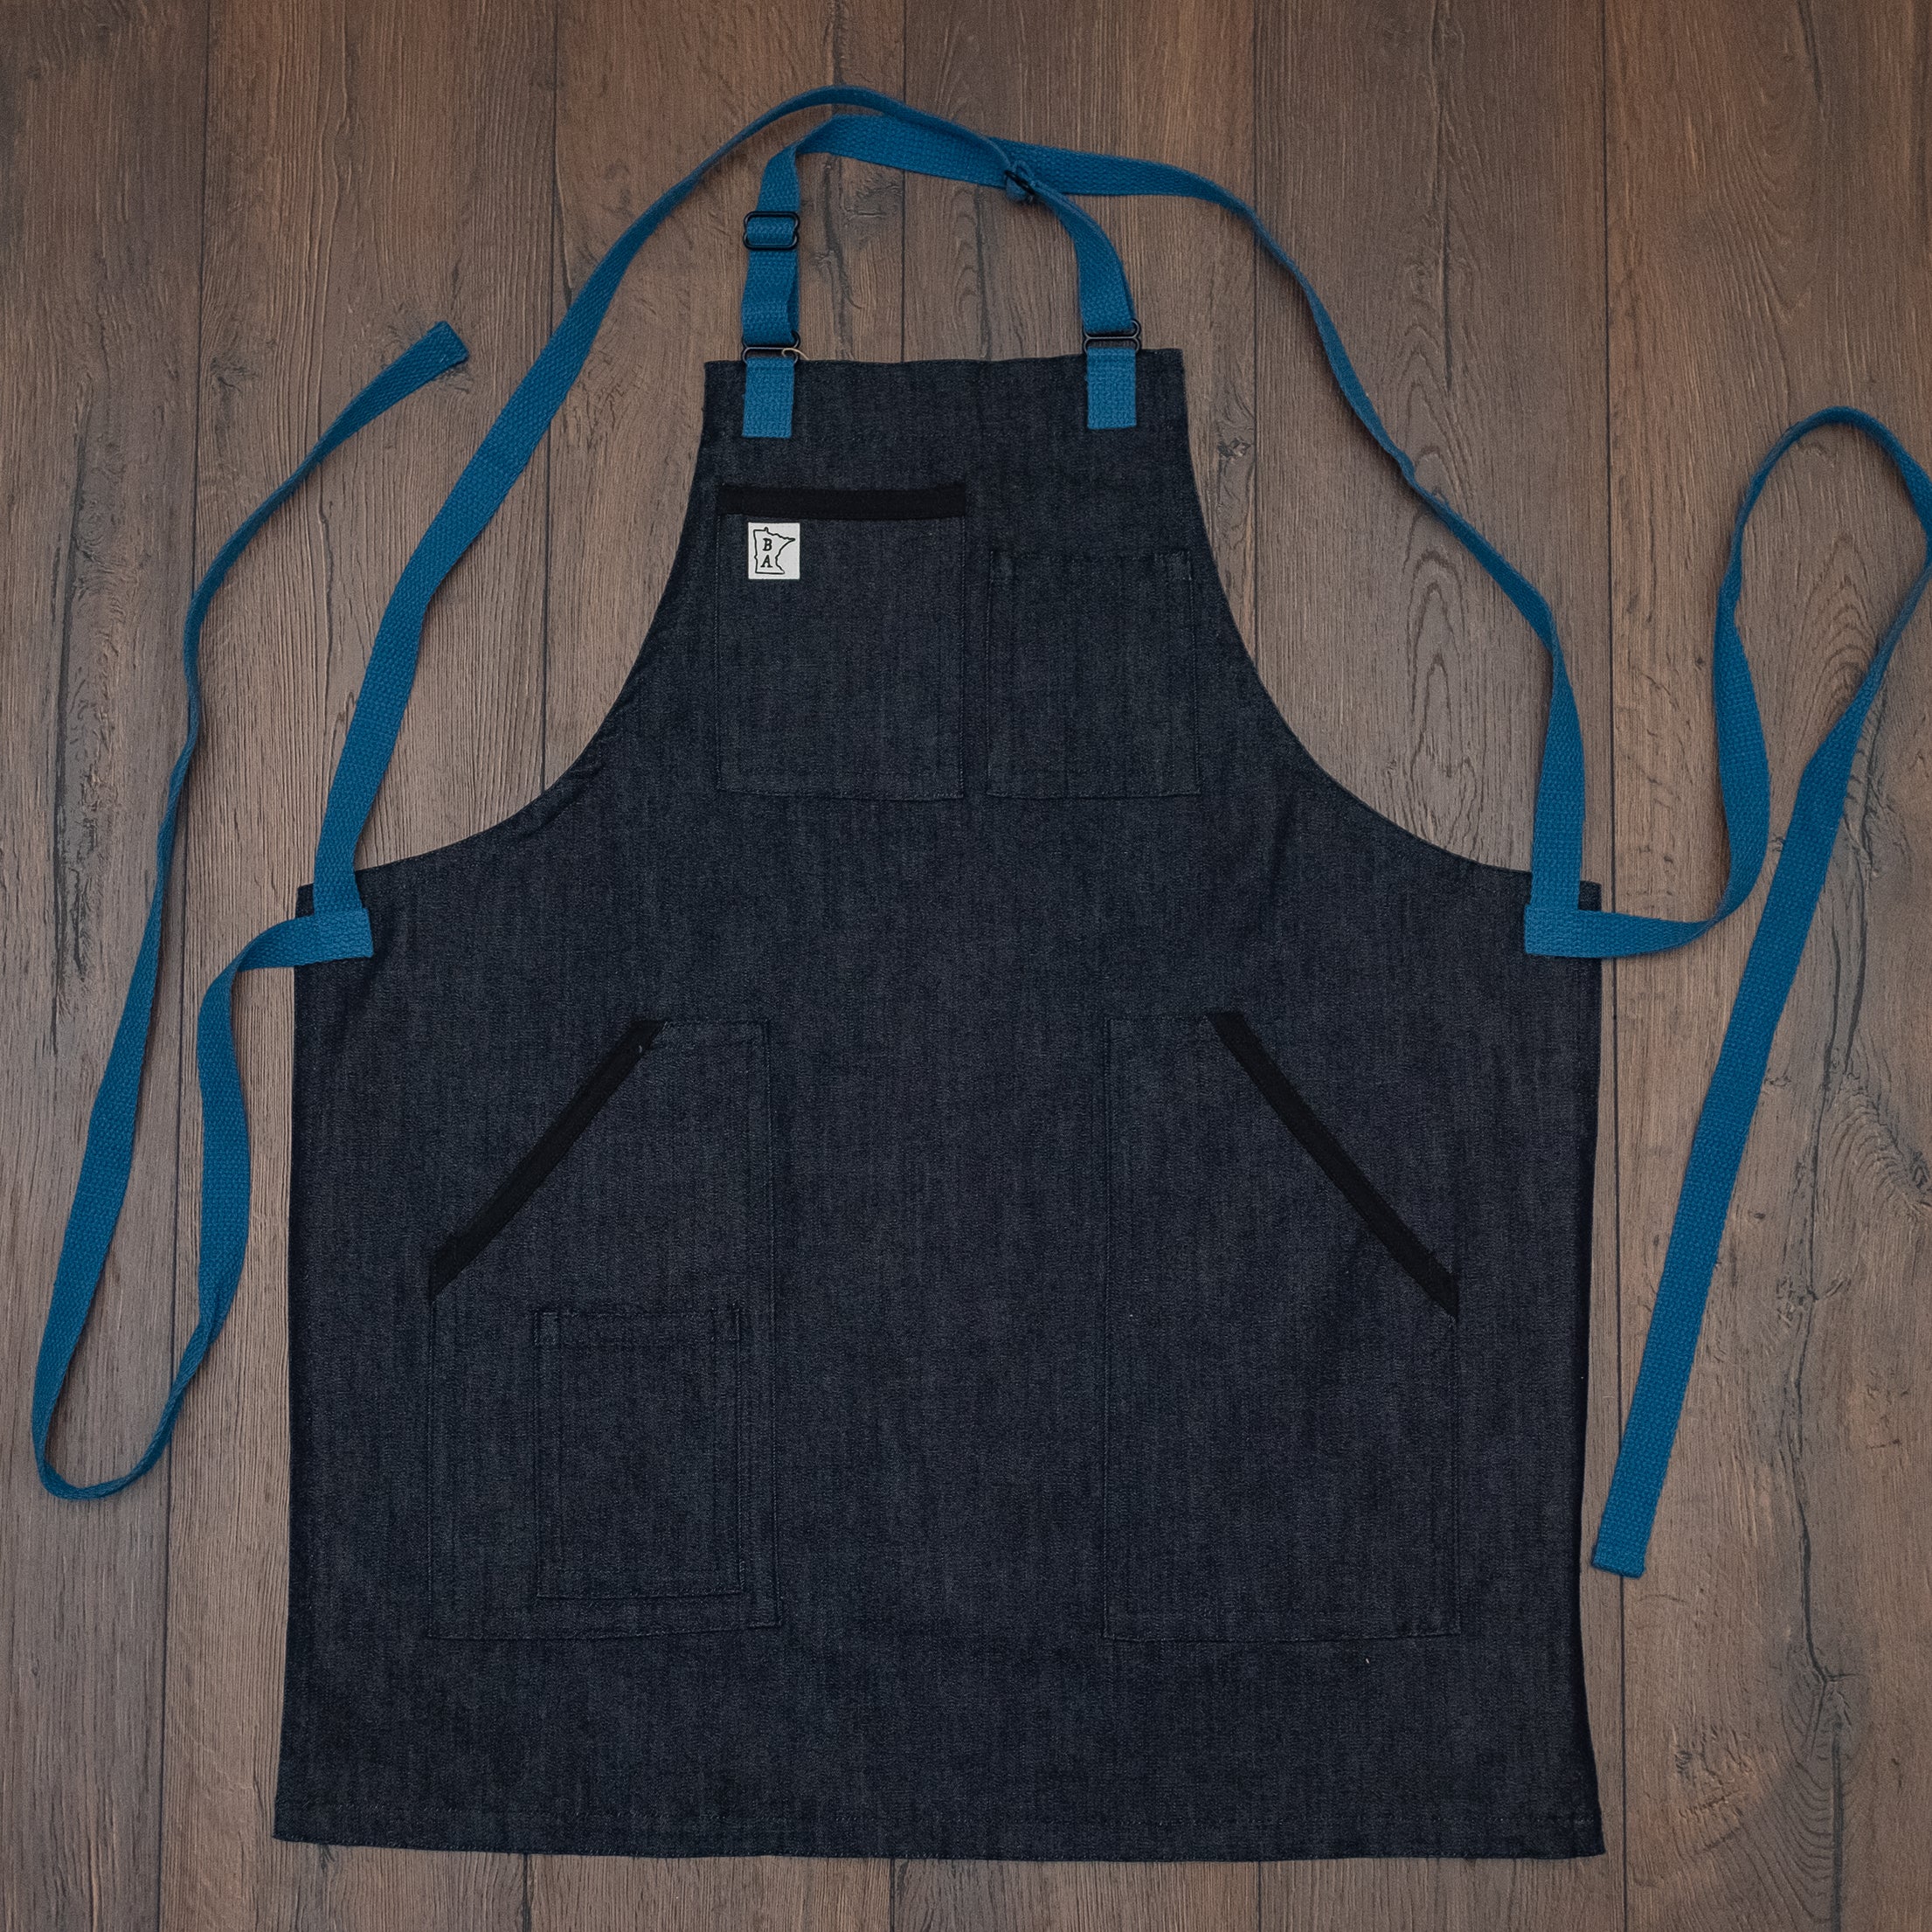 The denim apron design of the Black and Blue collection laid out flat on a wooden surface, making visible the blue strapping and black lined pockets. Black and Blue Denim was designed and sold by Craftmade Aprons, based in Minnesota. Sold in sizes of standard, Large, and XL.